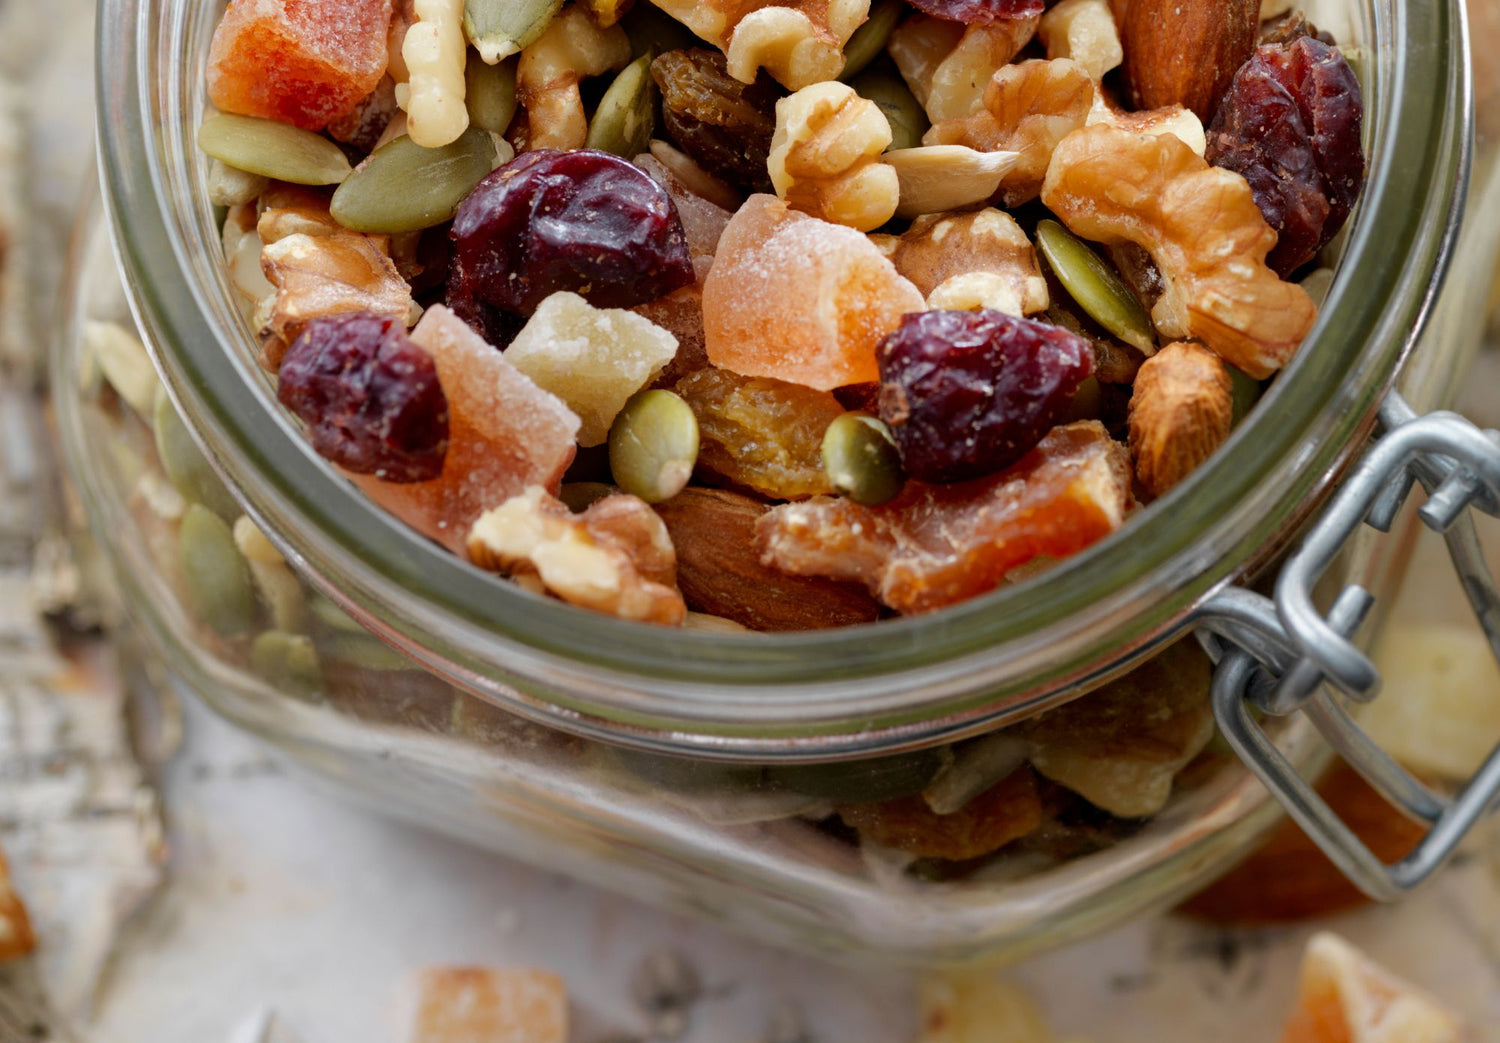 Healthy Snacking on the Go: Nourishing Foods for Summer Travel